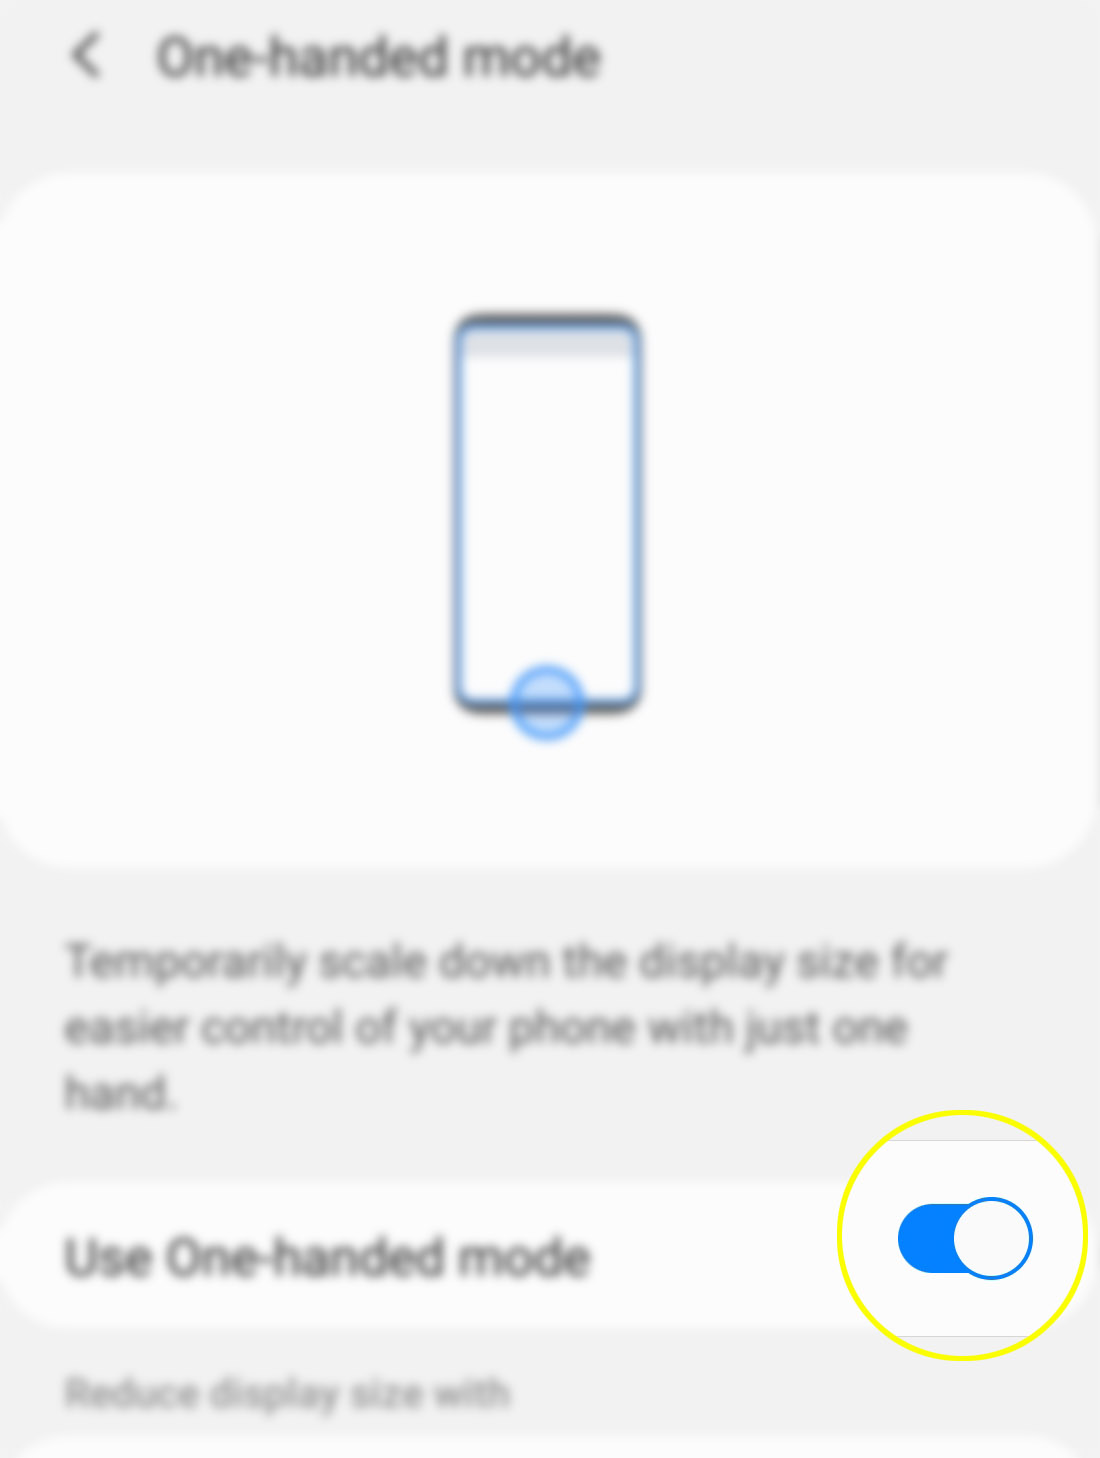 activate galaxy s20 one-handed mode - enable feature